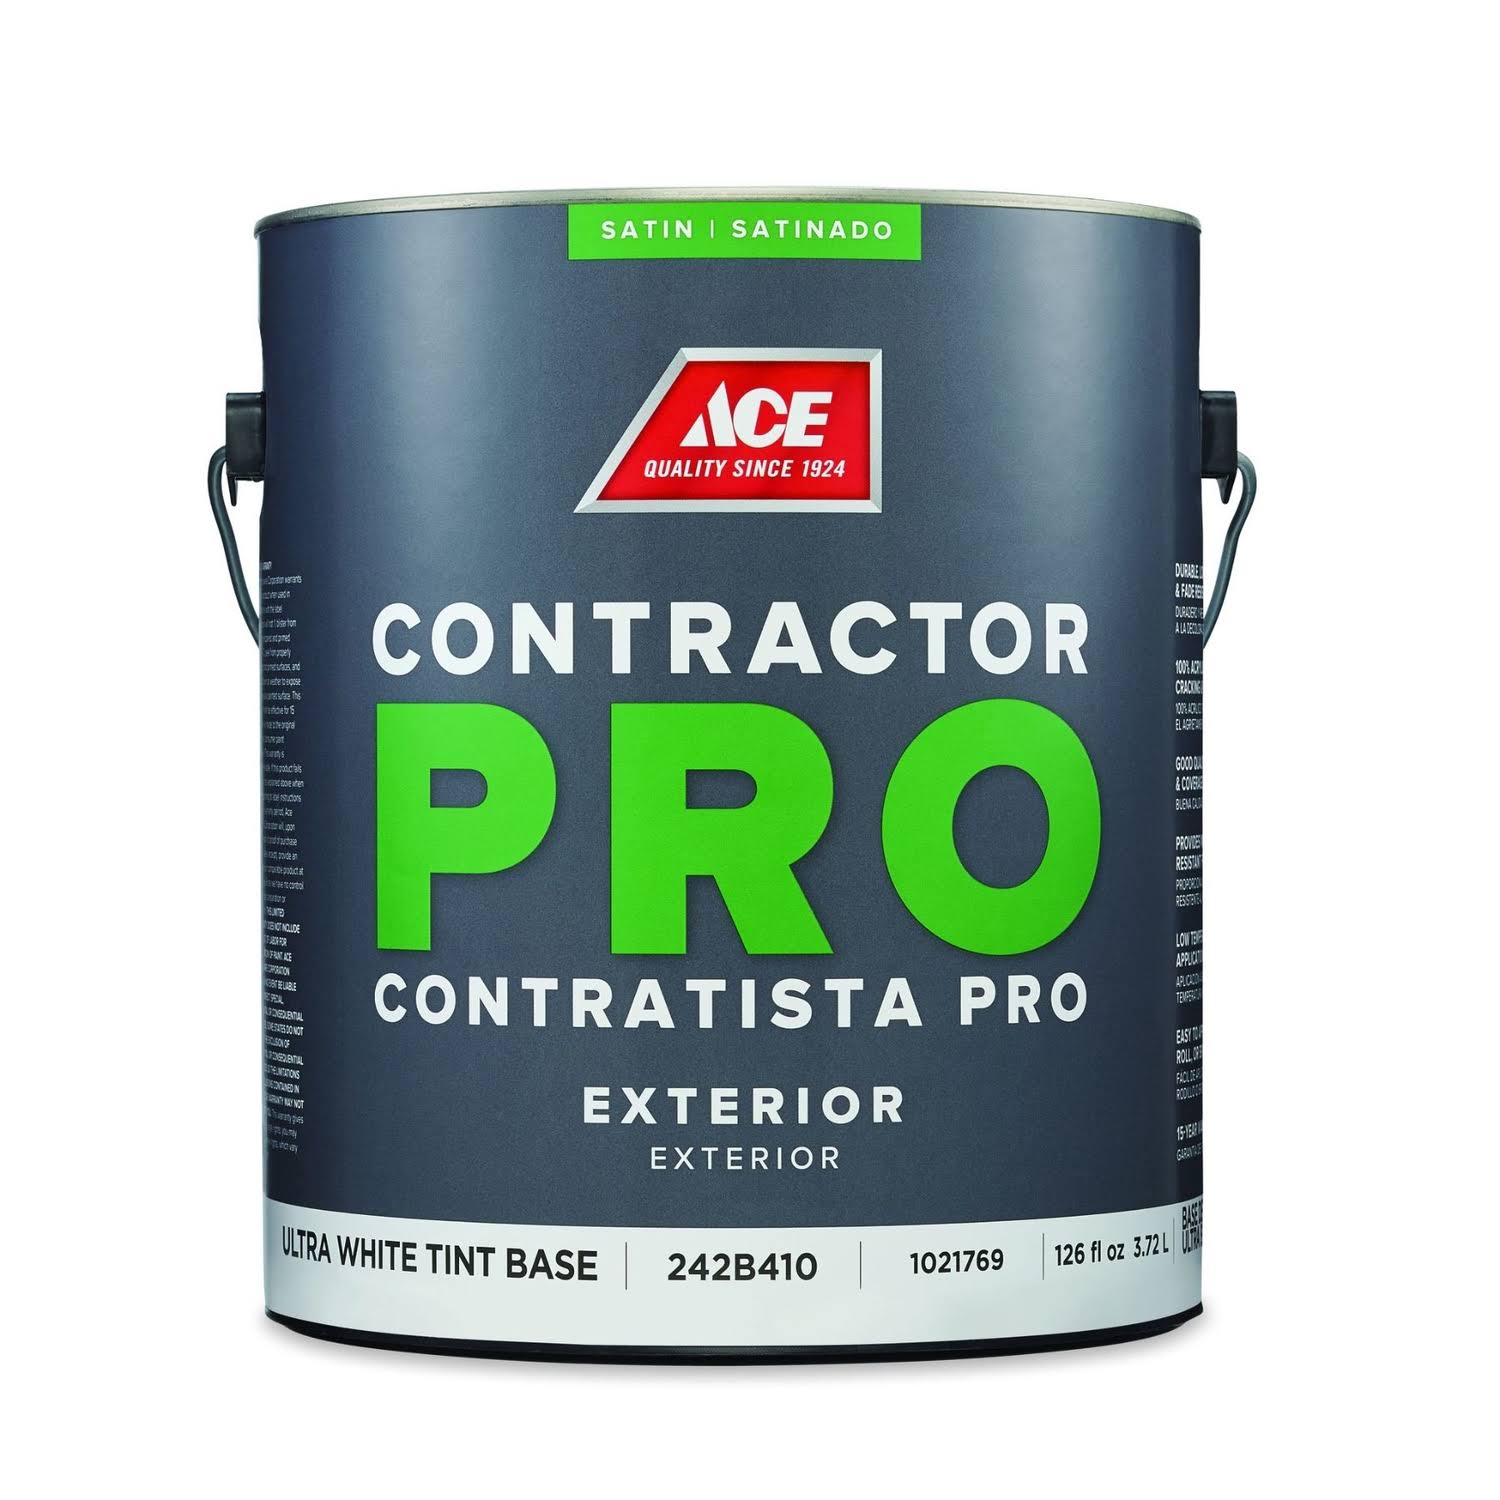 Ace Contractor Pro Satin Tint Base Ultra White Base Acrylic Latex Paint Exterior 1 gal.